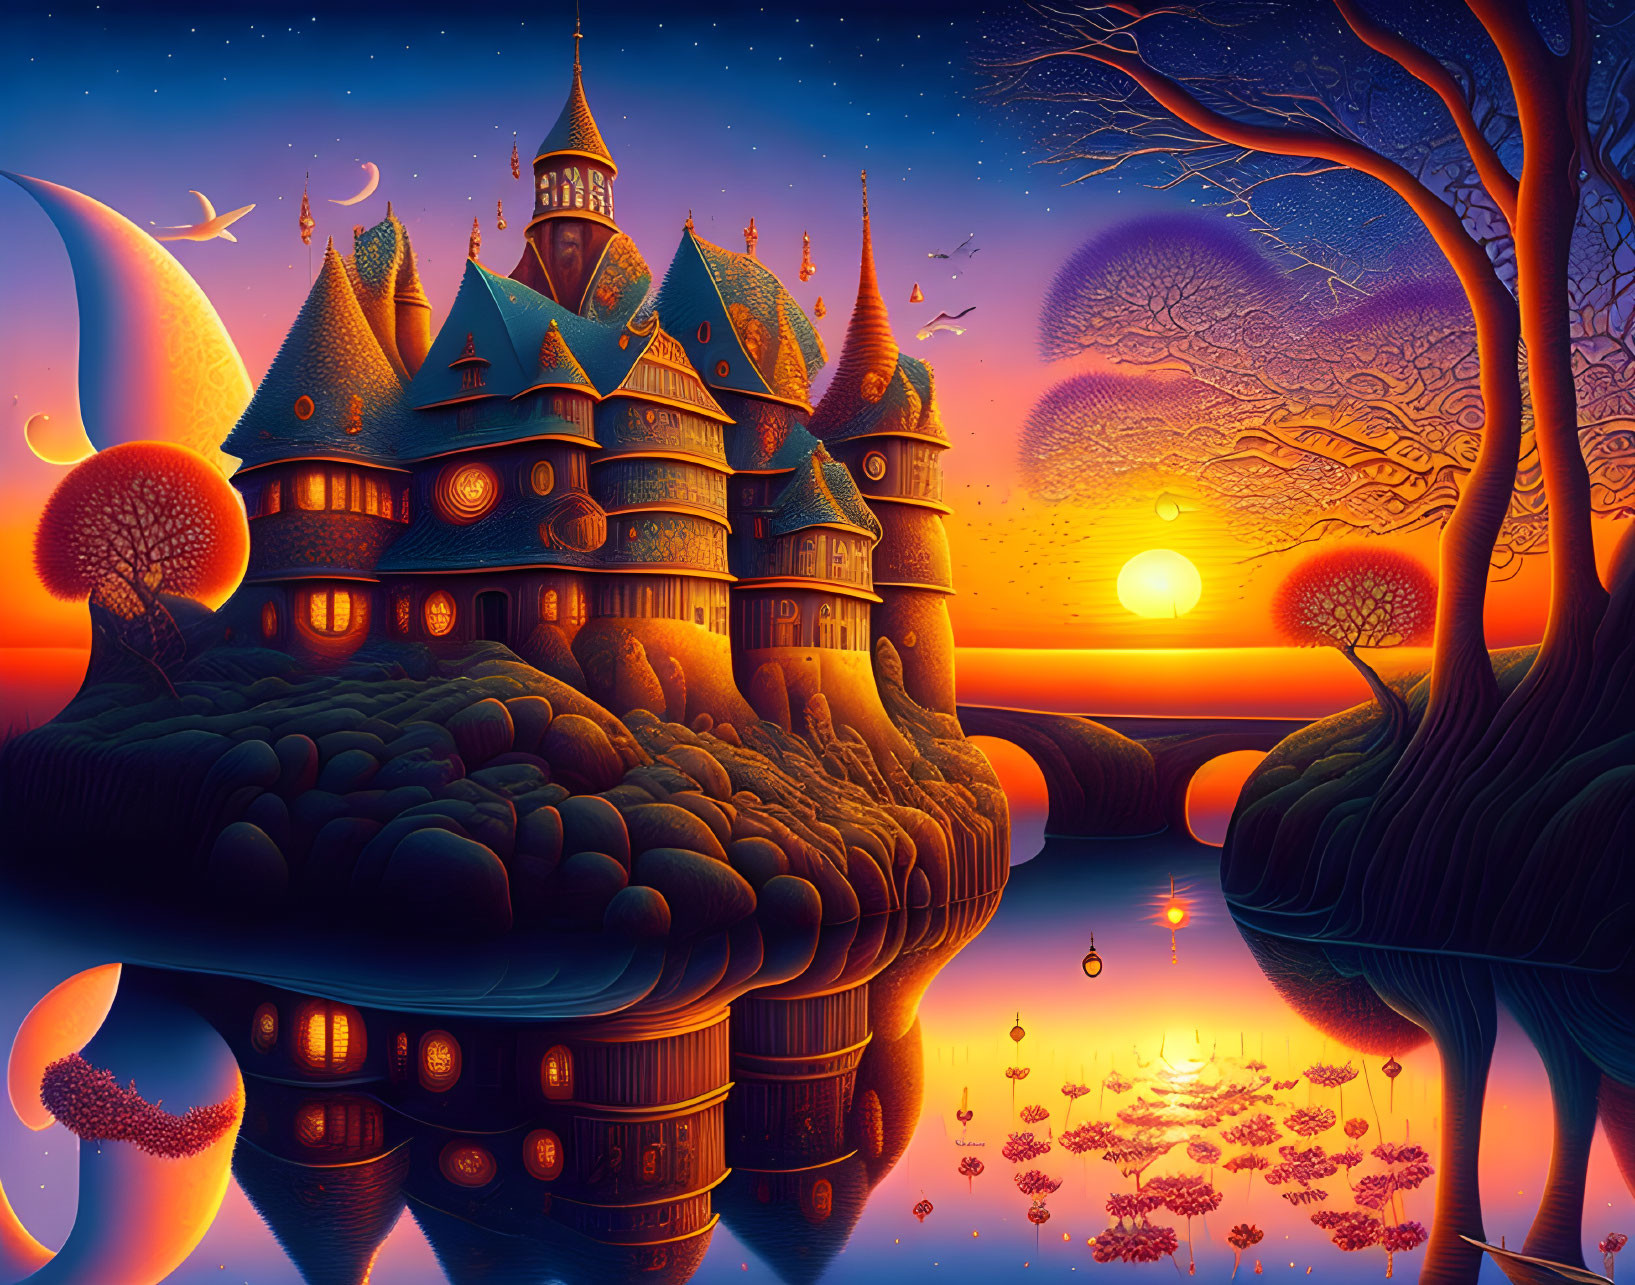 Fantasy sunset landscape with enchanted castle, whimsical trees, lake, crescent moon